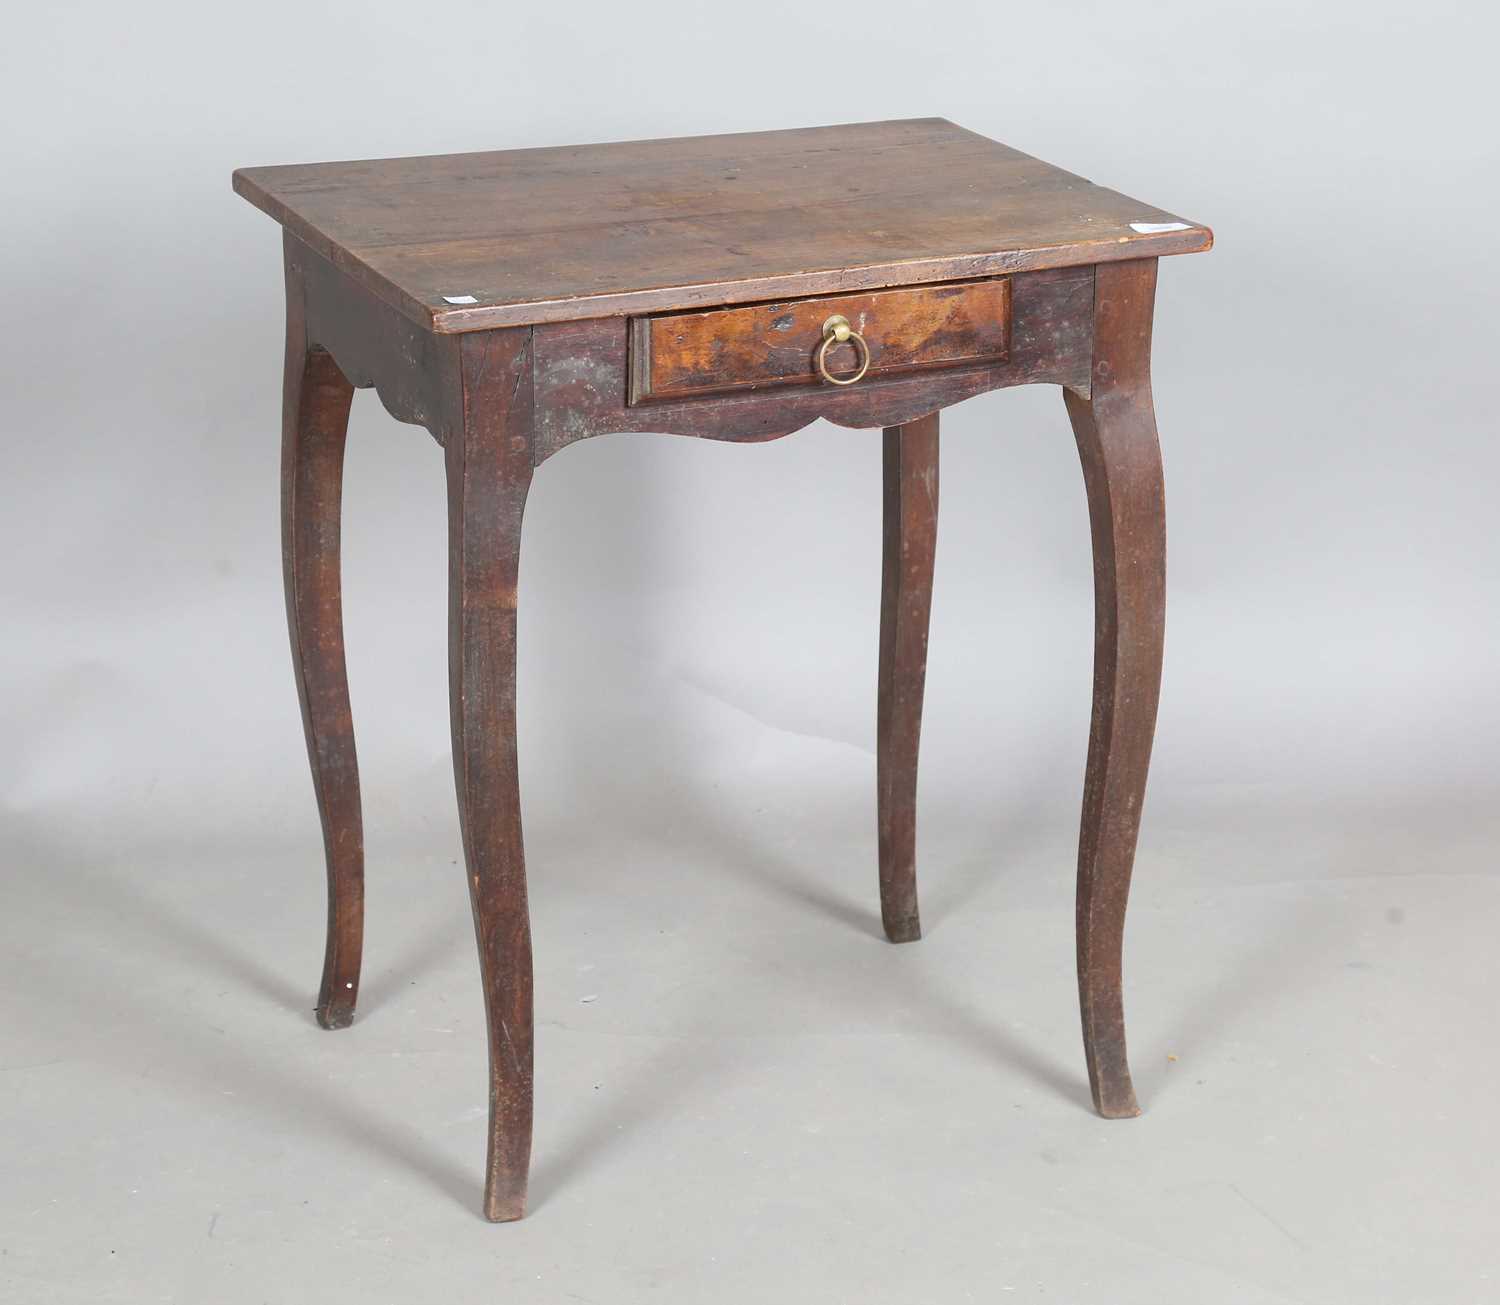 A small 18th century French walnut side table, fitted with a single frieze drawer, height 64cm,